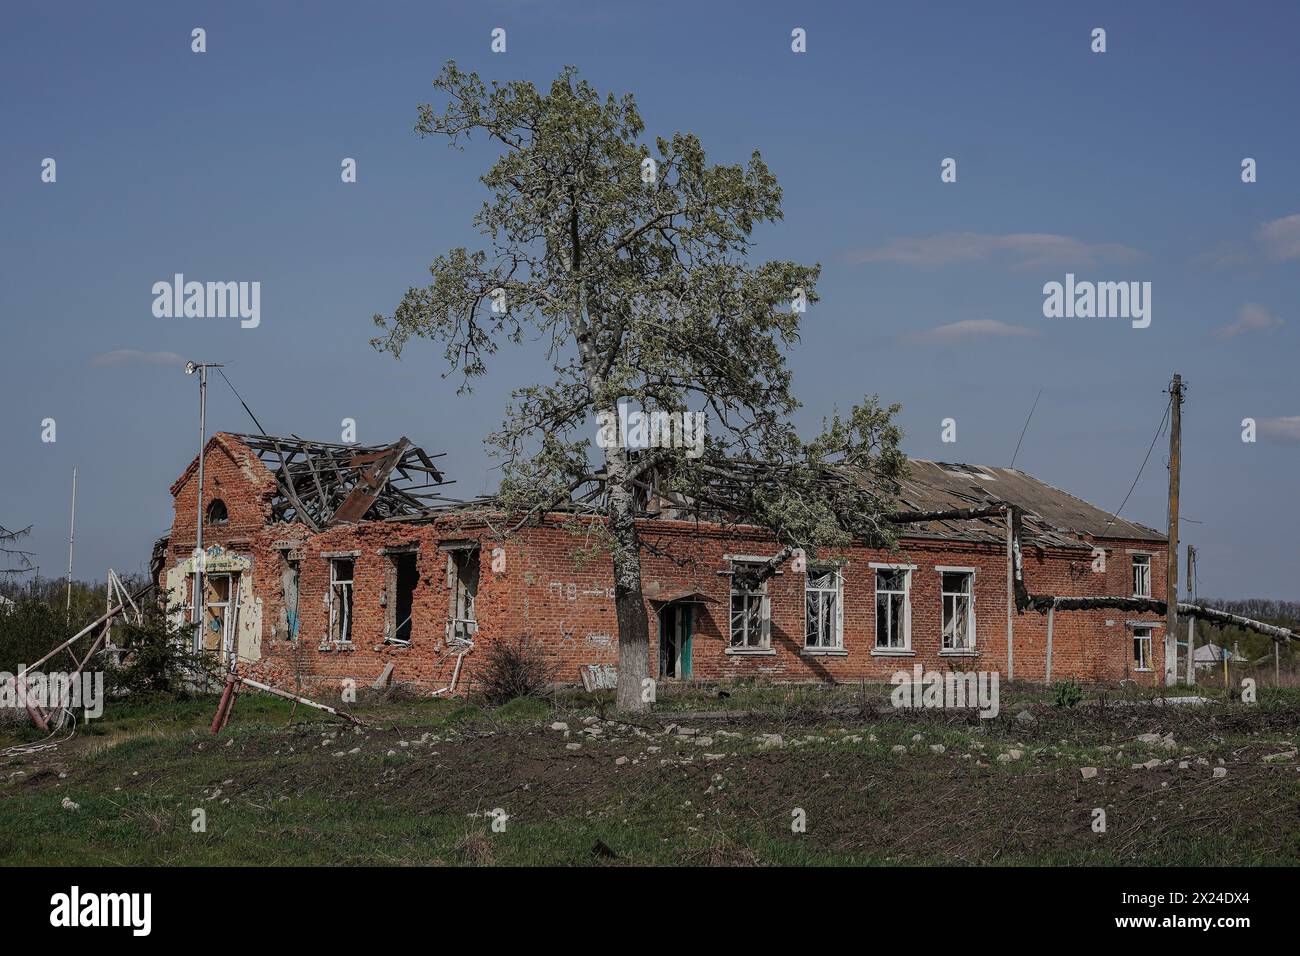 Yevhen Vasyliev/Le Pictorium - HRAKOVE, KHARKIV REGION - 12/04/2024 - Ukraine/kharkiv oblast/Hrakove - From February 25 to September 7, 2022, the village was occupied by the Russian army until it was liberated by the Ukrainian Armed Forces. The village was heavily damaged as it was on the front line under constant shelling for 195 days, and the consequences are still visible 19 months after de-occupation. The school, the village council building, the church, shops, private and apartment buildings - everything was destroyed. A torture chamber was set up in one of the basements of an Stock Photo